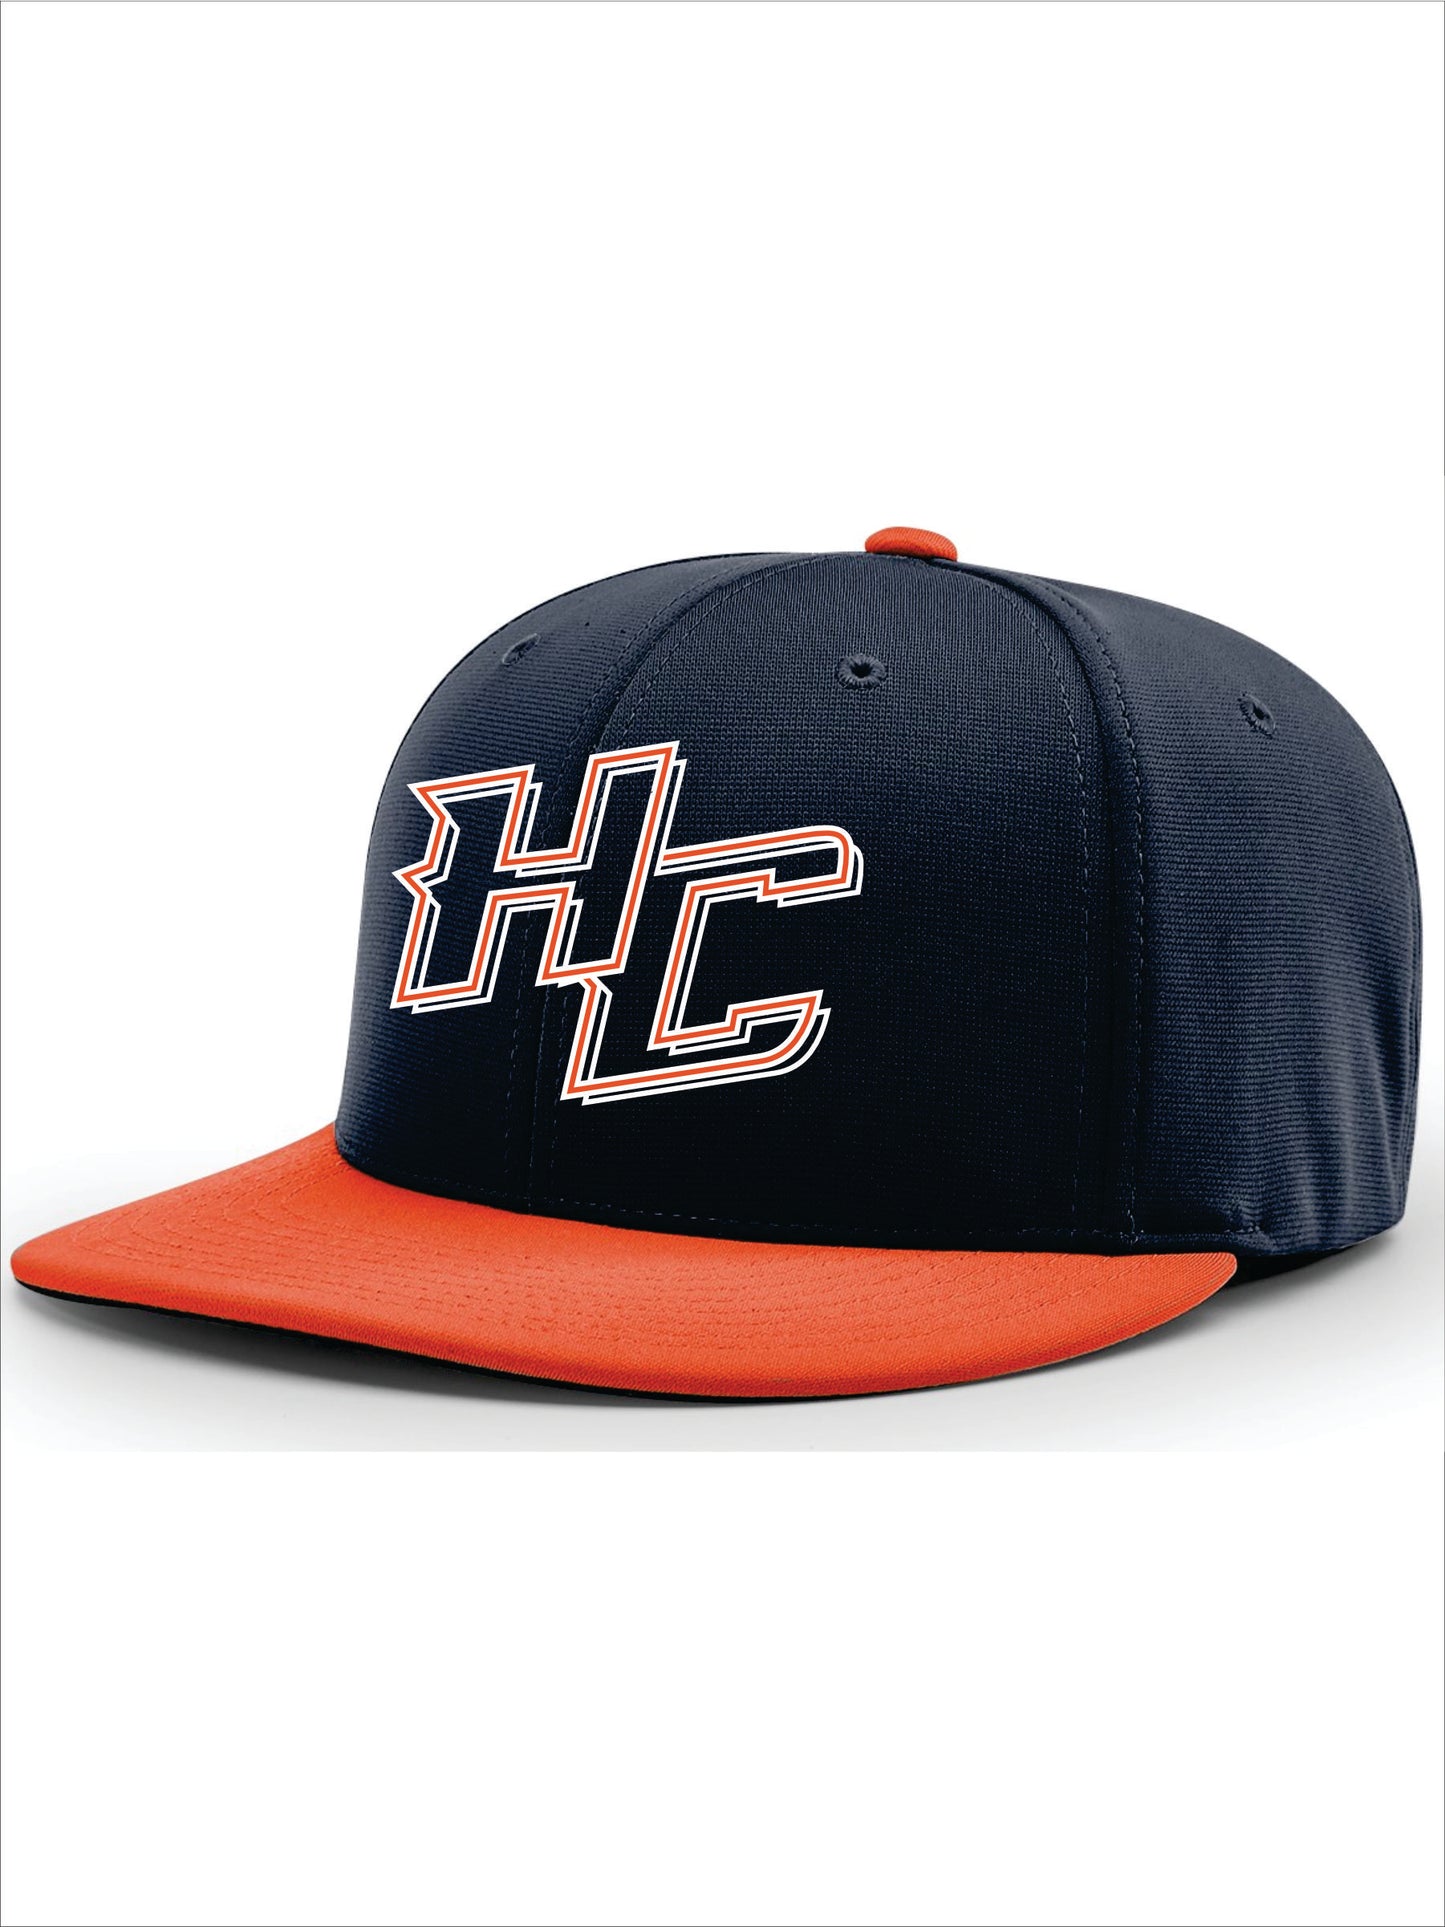 Houston Colts "HC" Fitted Cap